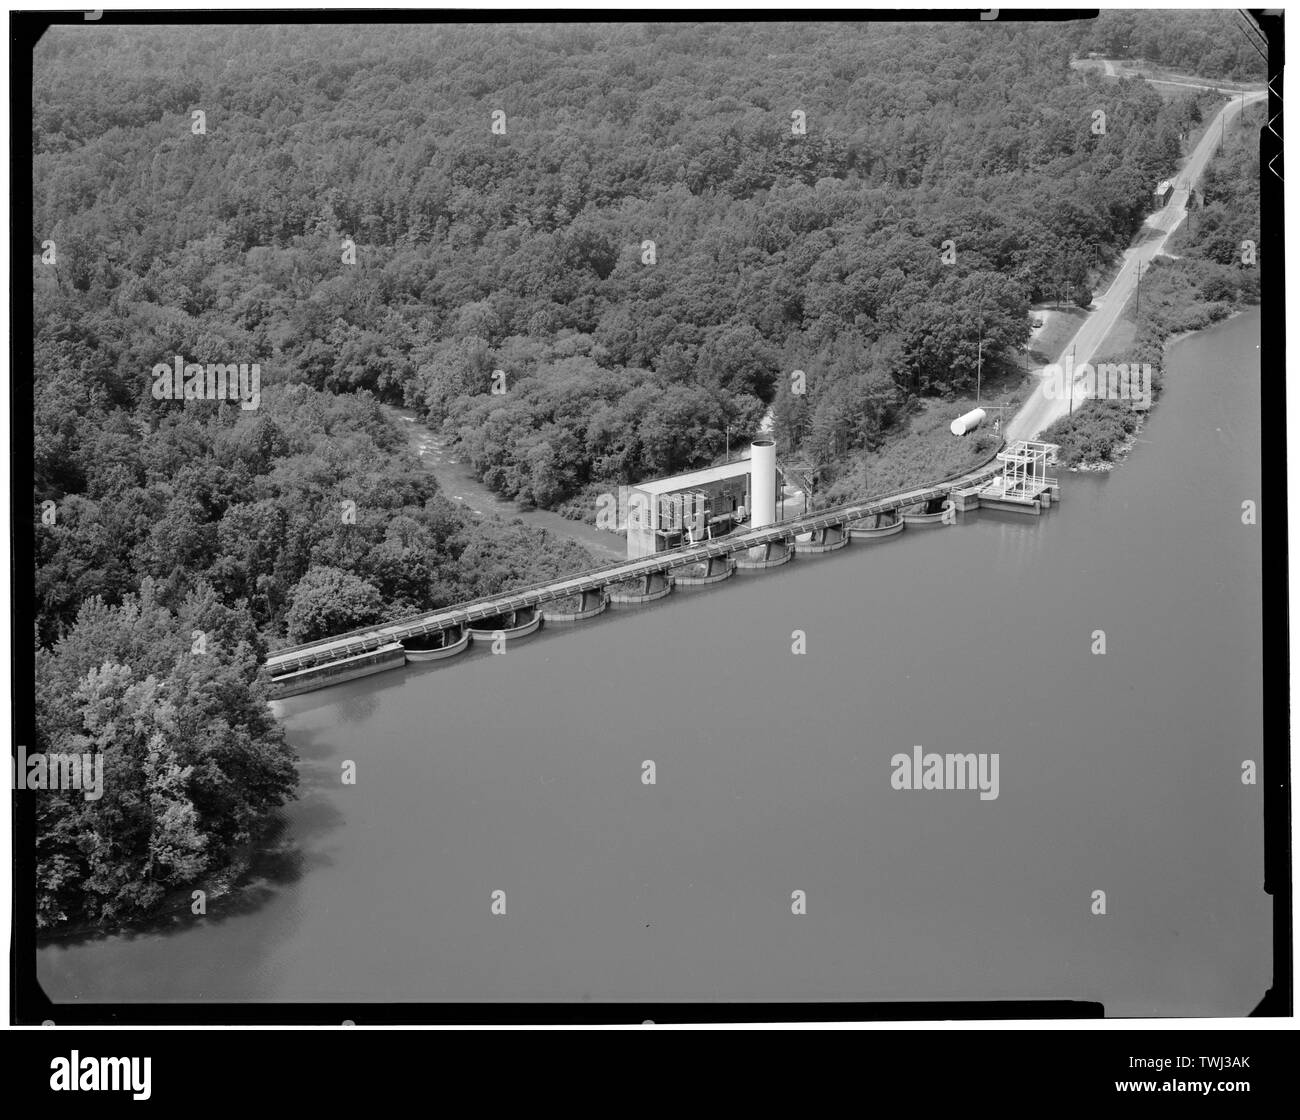 Secession Lake dam- aerial view of intake gates and road bed, from lake - Abbeville Hydroelectric Power Plant, State Highway 284 and County Road 72, Rocky River (historical), Abbeville County, SC; Abbeville Water and Electric Plant Company; Pennell, James Roy; White, W H; Abbeville Power Company Incorporated; D.M. Rickenbacker Construction Company; Townsend, C P; Wideman and Singleton; Britton, John B; S. Morgan Smith Company; Woodward Governor Company; Bethlehem Steel Company; Westinghouse Corporation; Bush Sulzer Brothers Company; Mark Brothers; Cary, Brian, transmitter Stock Photo